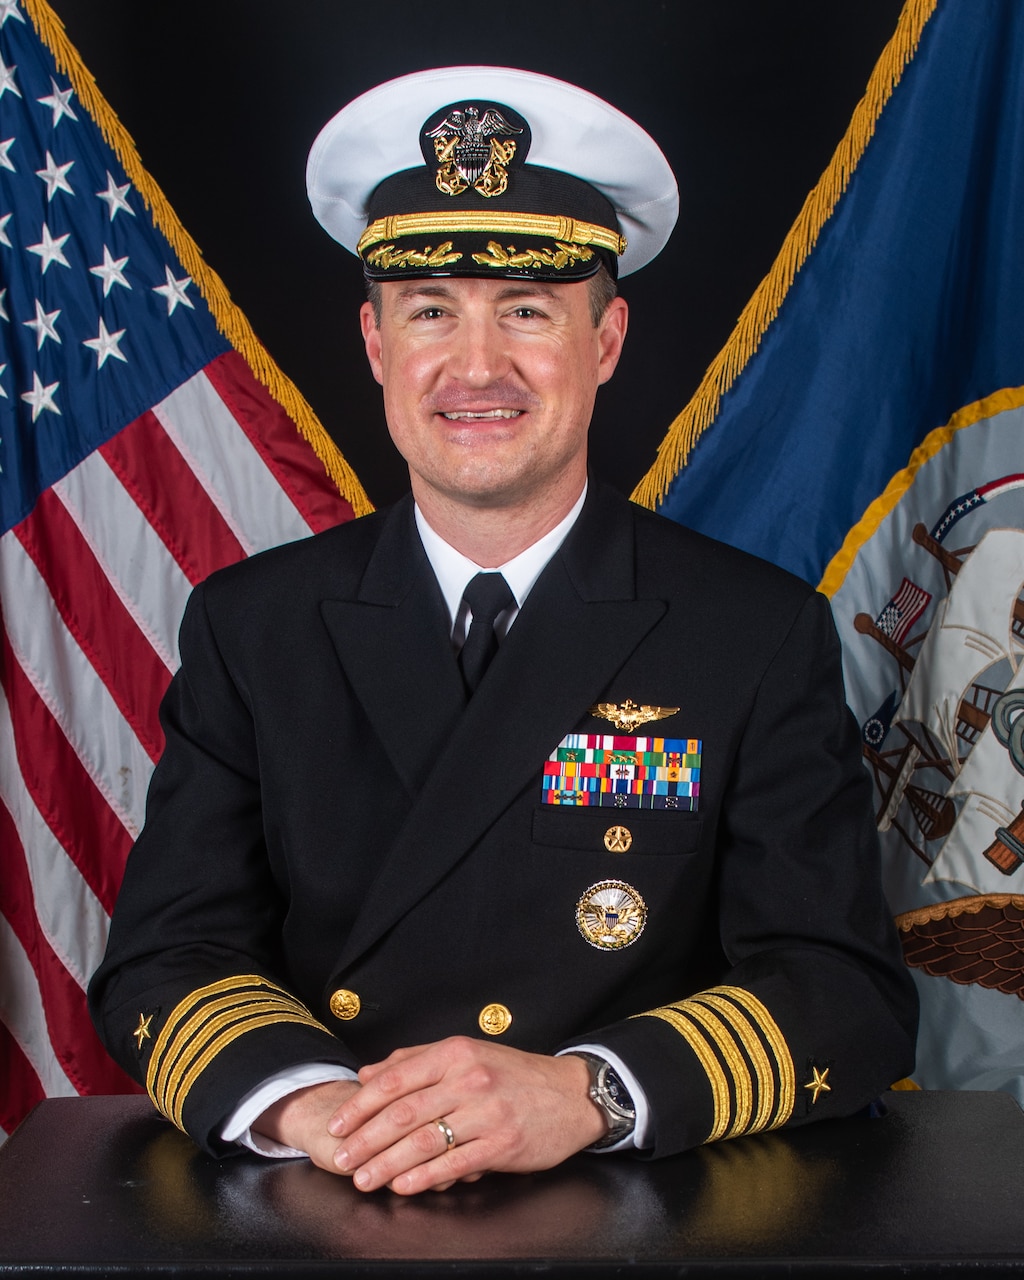 Official photo of CAPT Fulwider